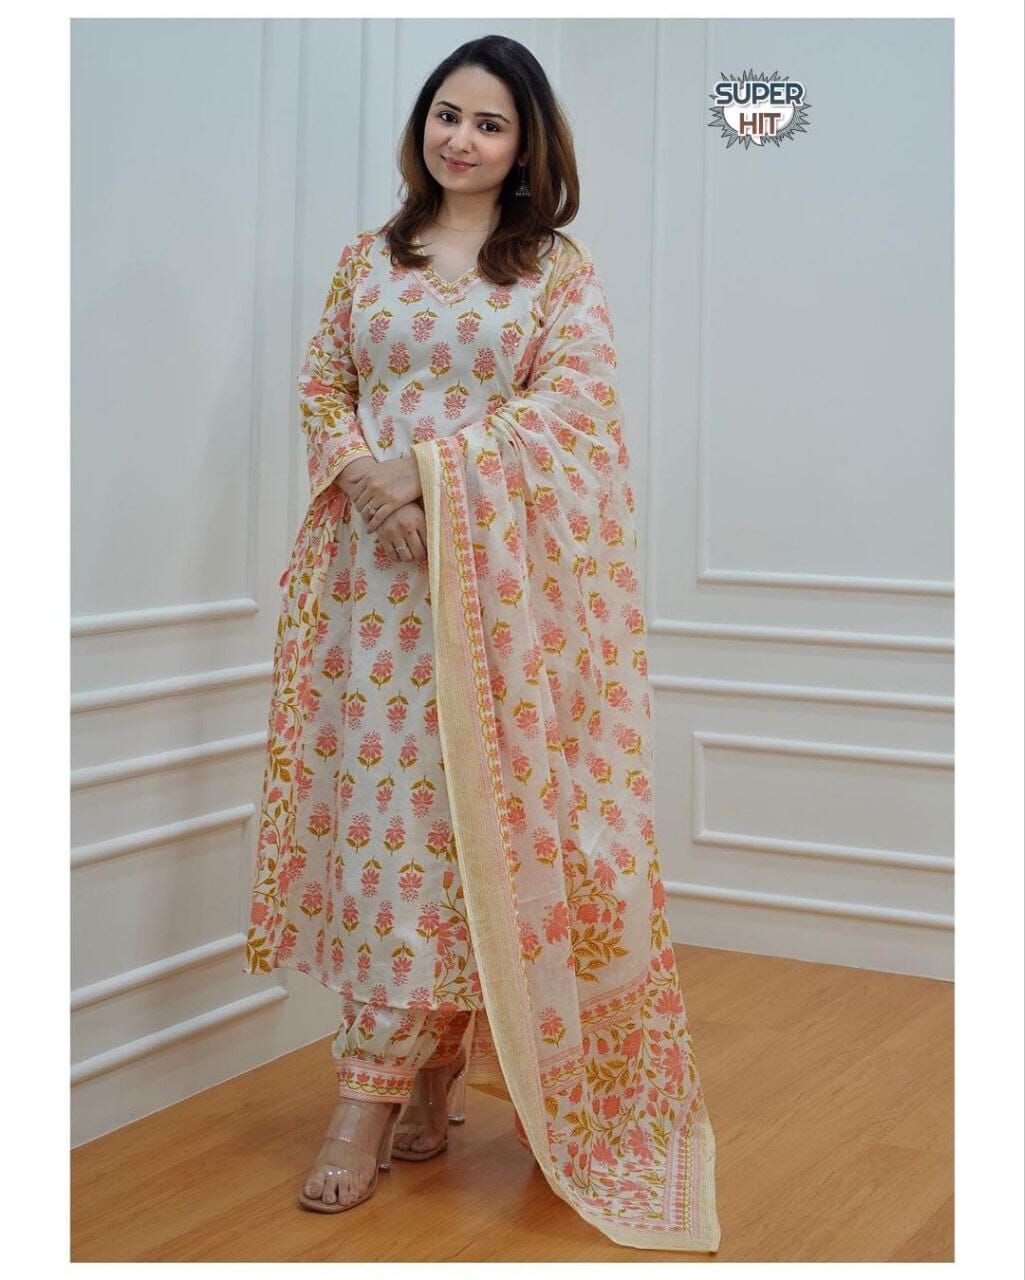 Floral Heavy Rayon Afghani Designer Suit in 2 colors Designer Suits Shopin Di Apparels 